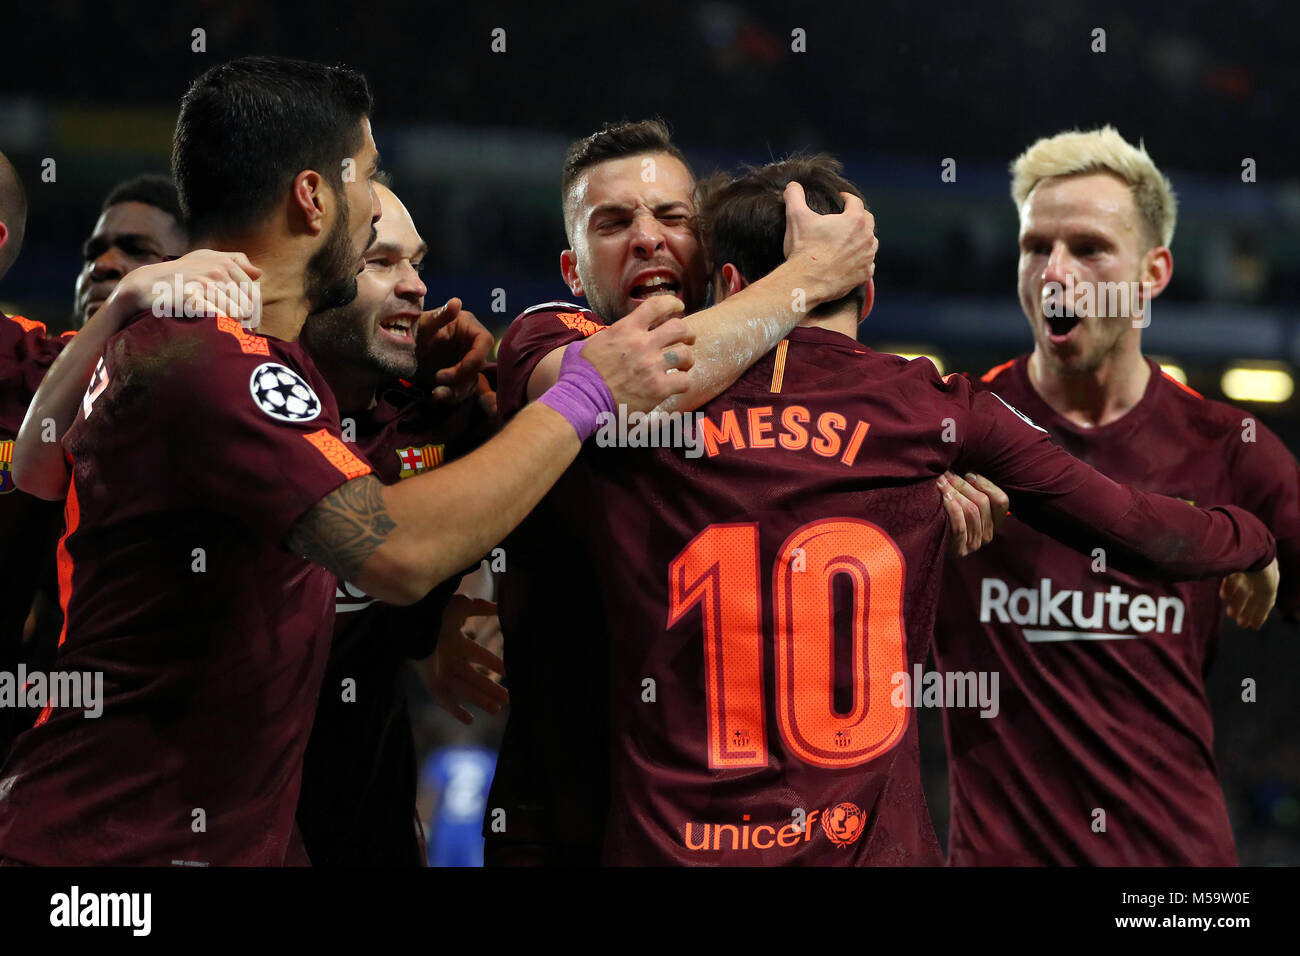 London, UK. 20th February, 2018. Lionel Messi of Barcelona is congratulated after scoring the equalising goal, making it 1-1 - Chelsea v Barcelona, UEFA Champions League, Round of 16, 1st Leg, Stamford Bridge, London - 20th February 2018. Credit: Richard Calver/Alamy Live News Stock Photo